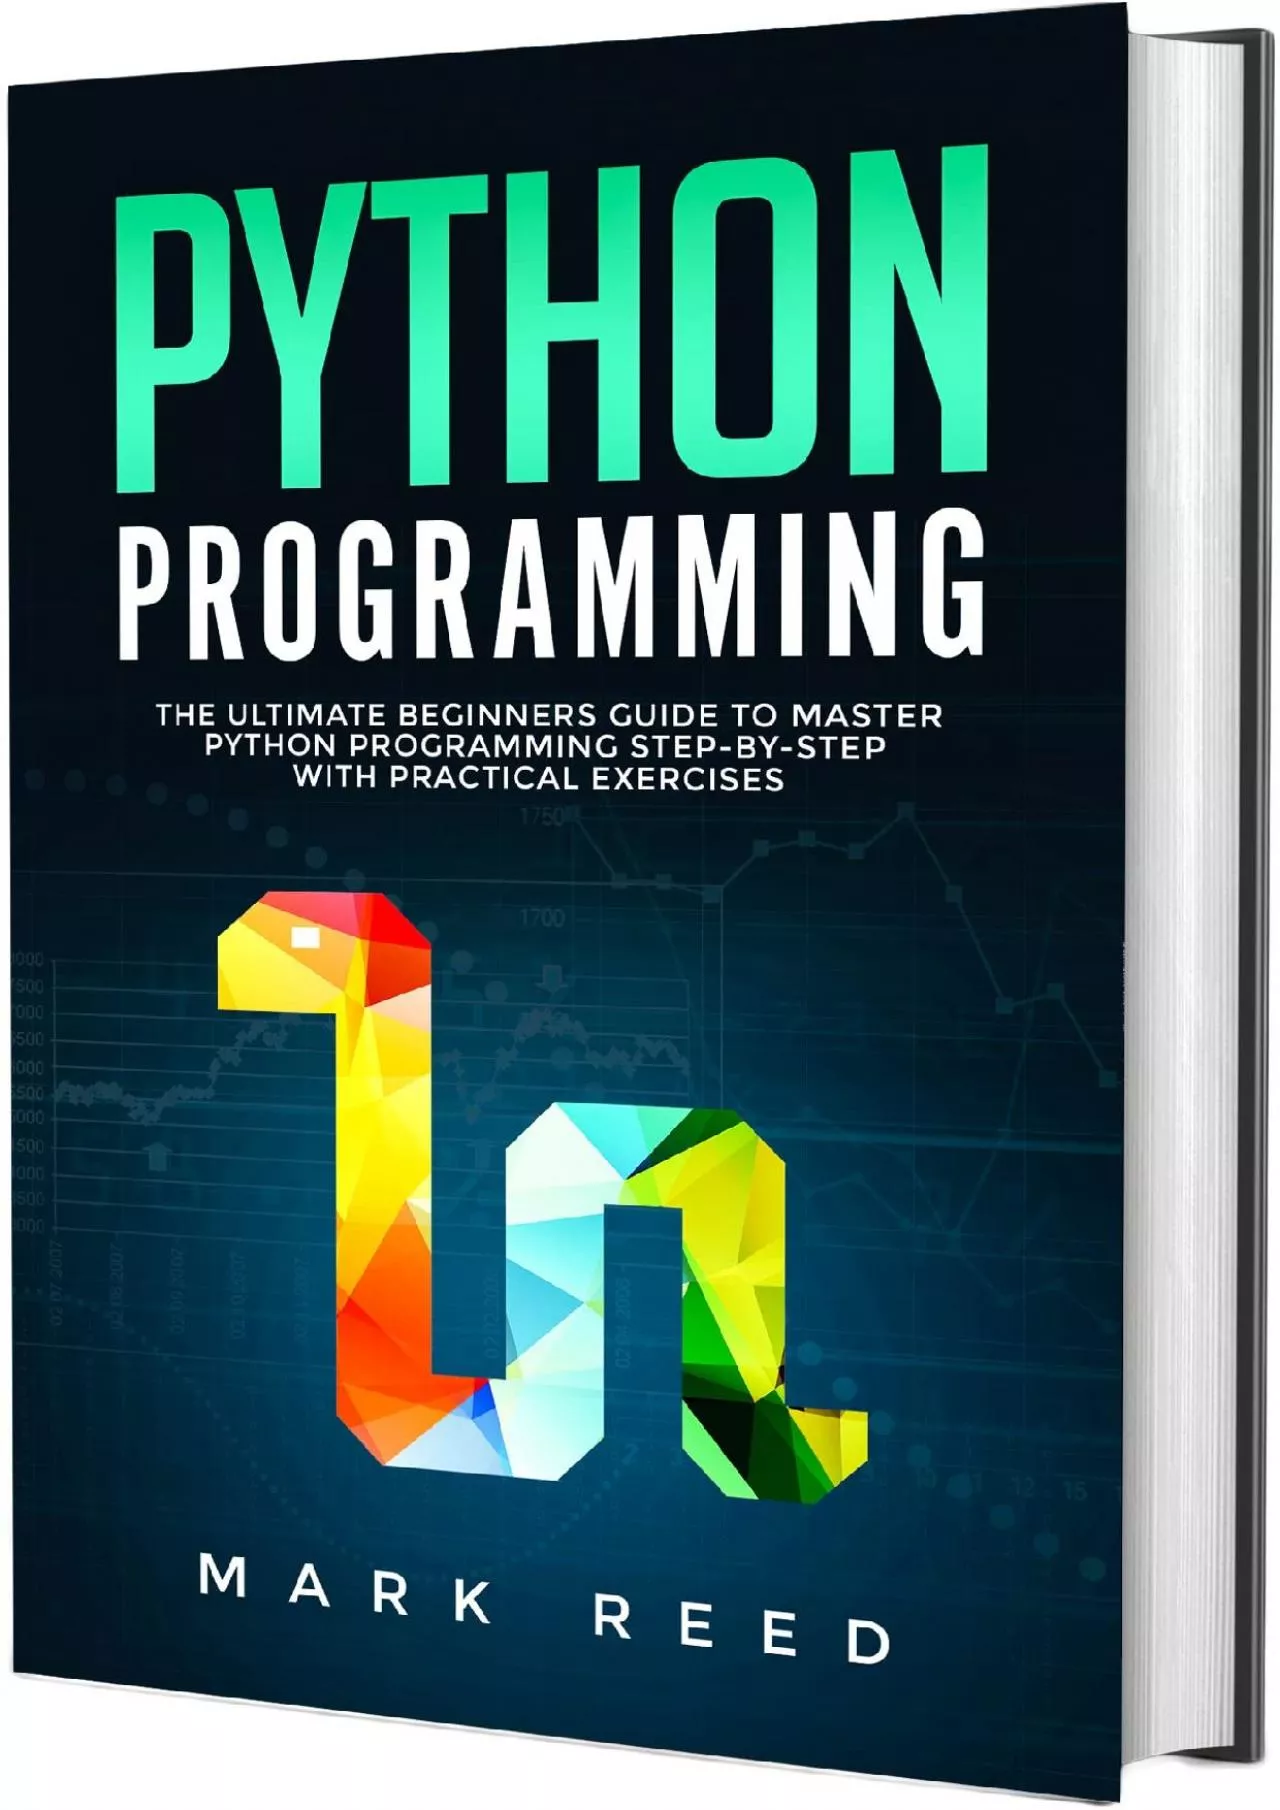 [READ]-Python Programming: The Ultimate Beginners Guide to Master Python Programming Step-by-Step